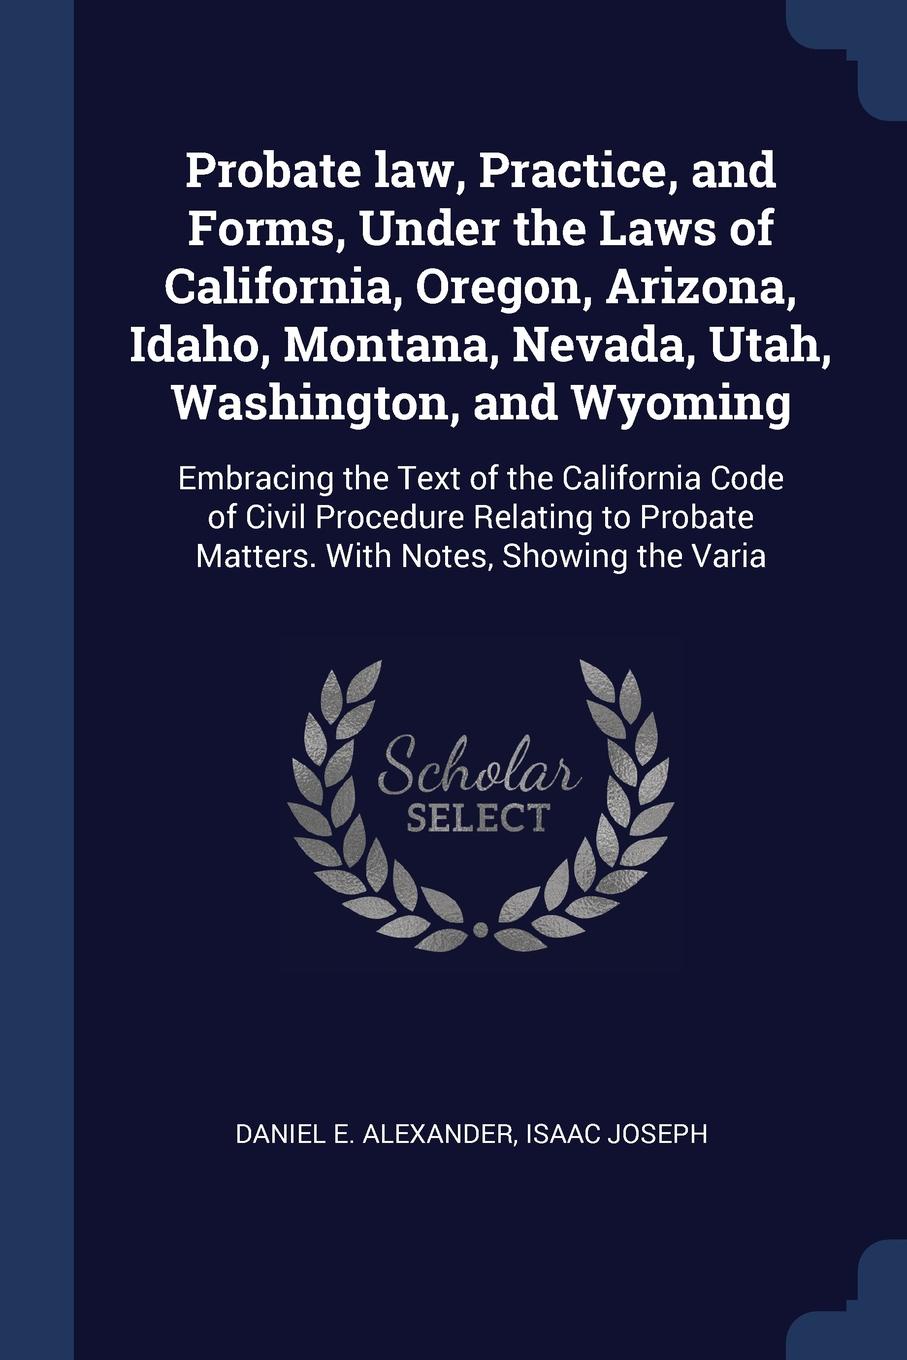 Probate law, Practice, and Forms, Under the Laws of California, Oregon, Arizona, Idaho, Montana, Nevada, Utah, Washington, and Wyoming. Embracing the Text of the California Code of Civil Procedure Relating to Probate Matters. With Notes, Showing t...